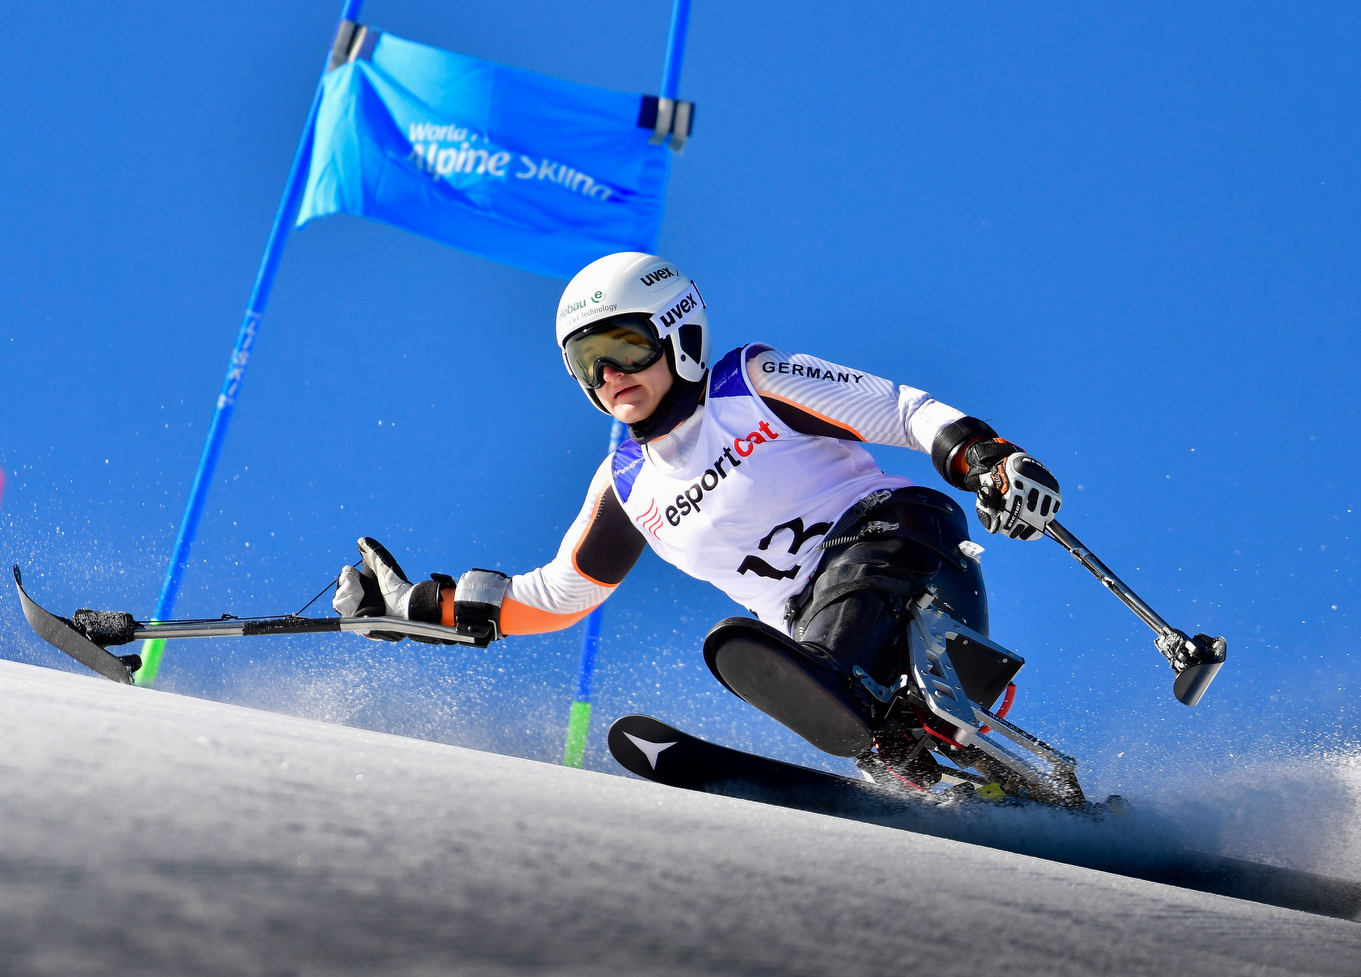 A disabled competitor using specially-adapted ski equipment